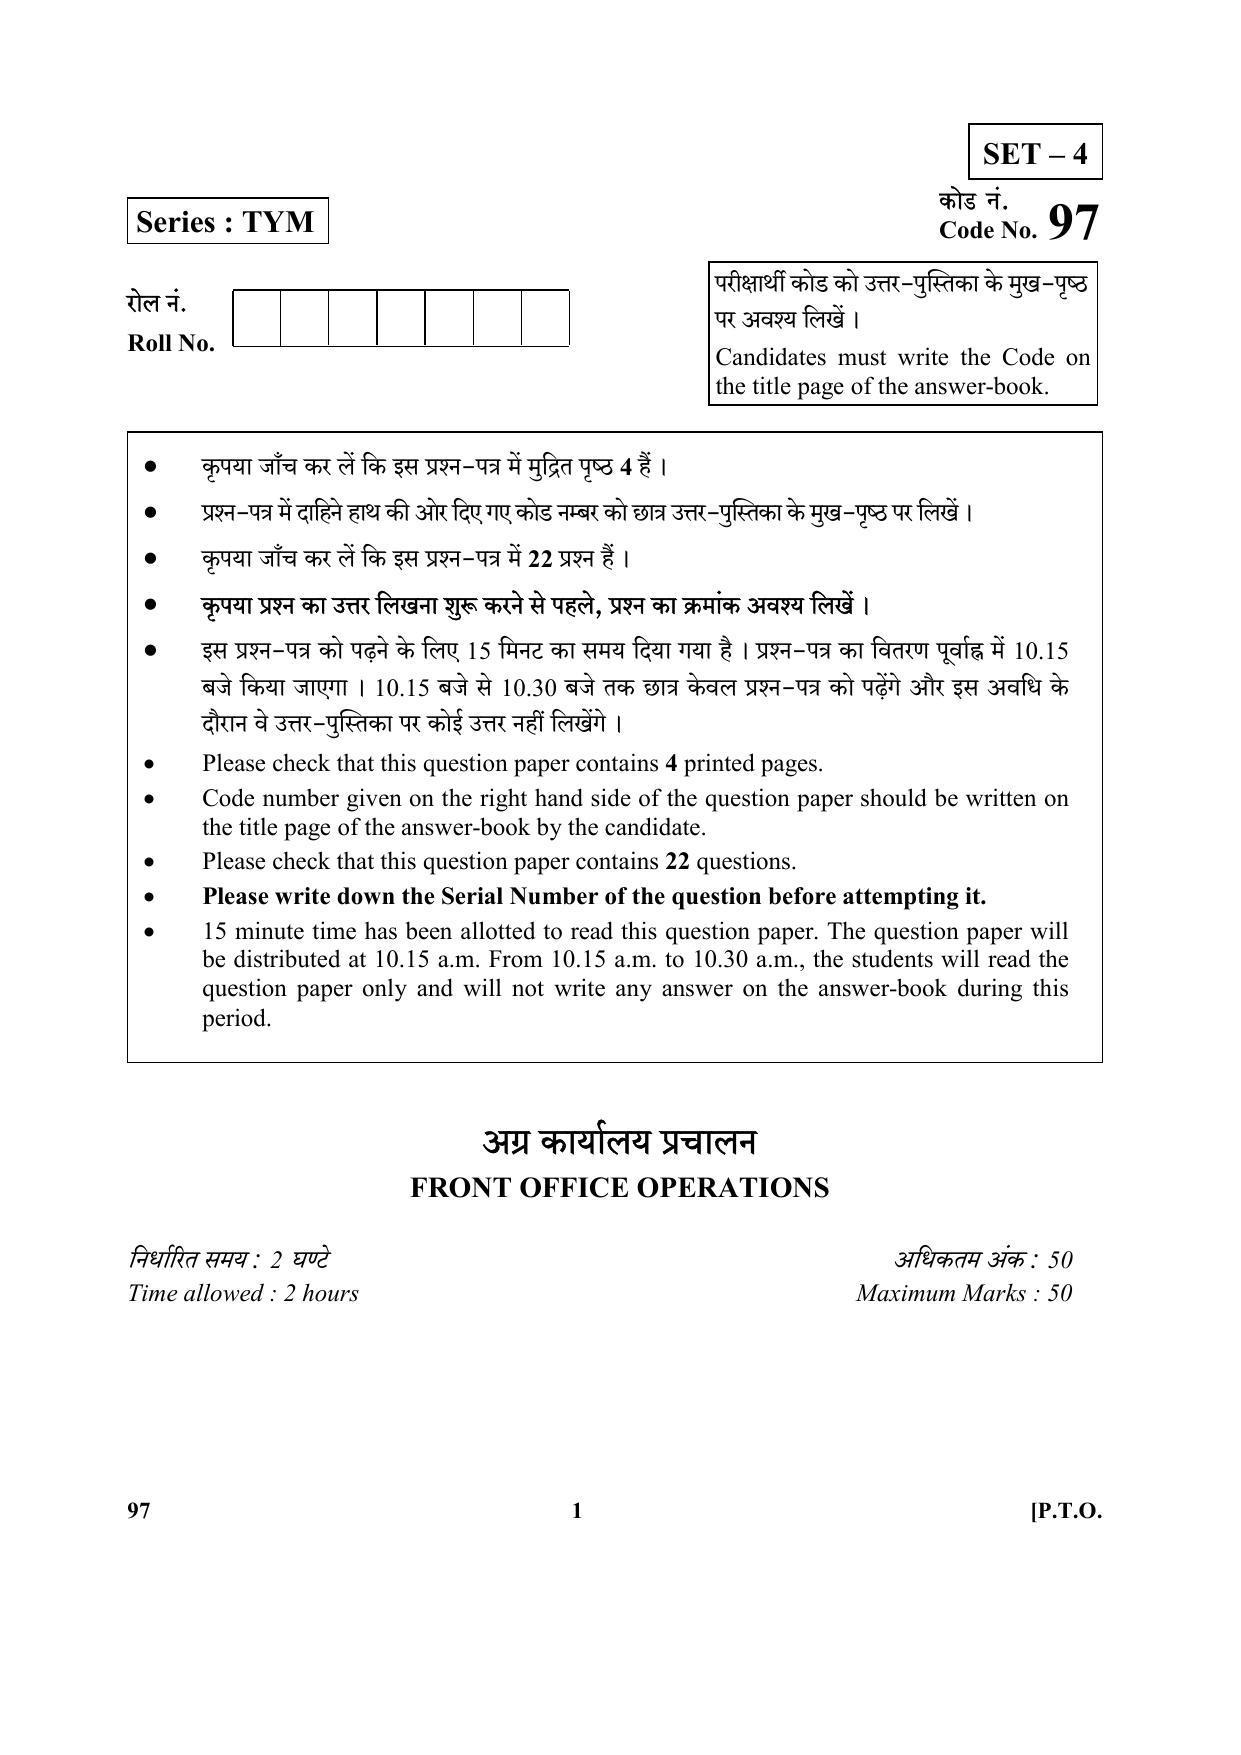 CBSE Class 10 97 (Front Office Operations) 2018 Question Paper - Page 1